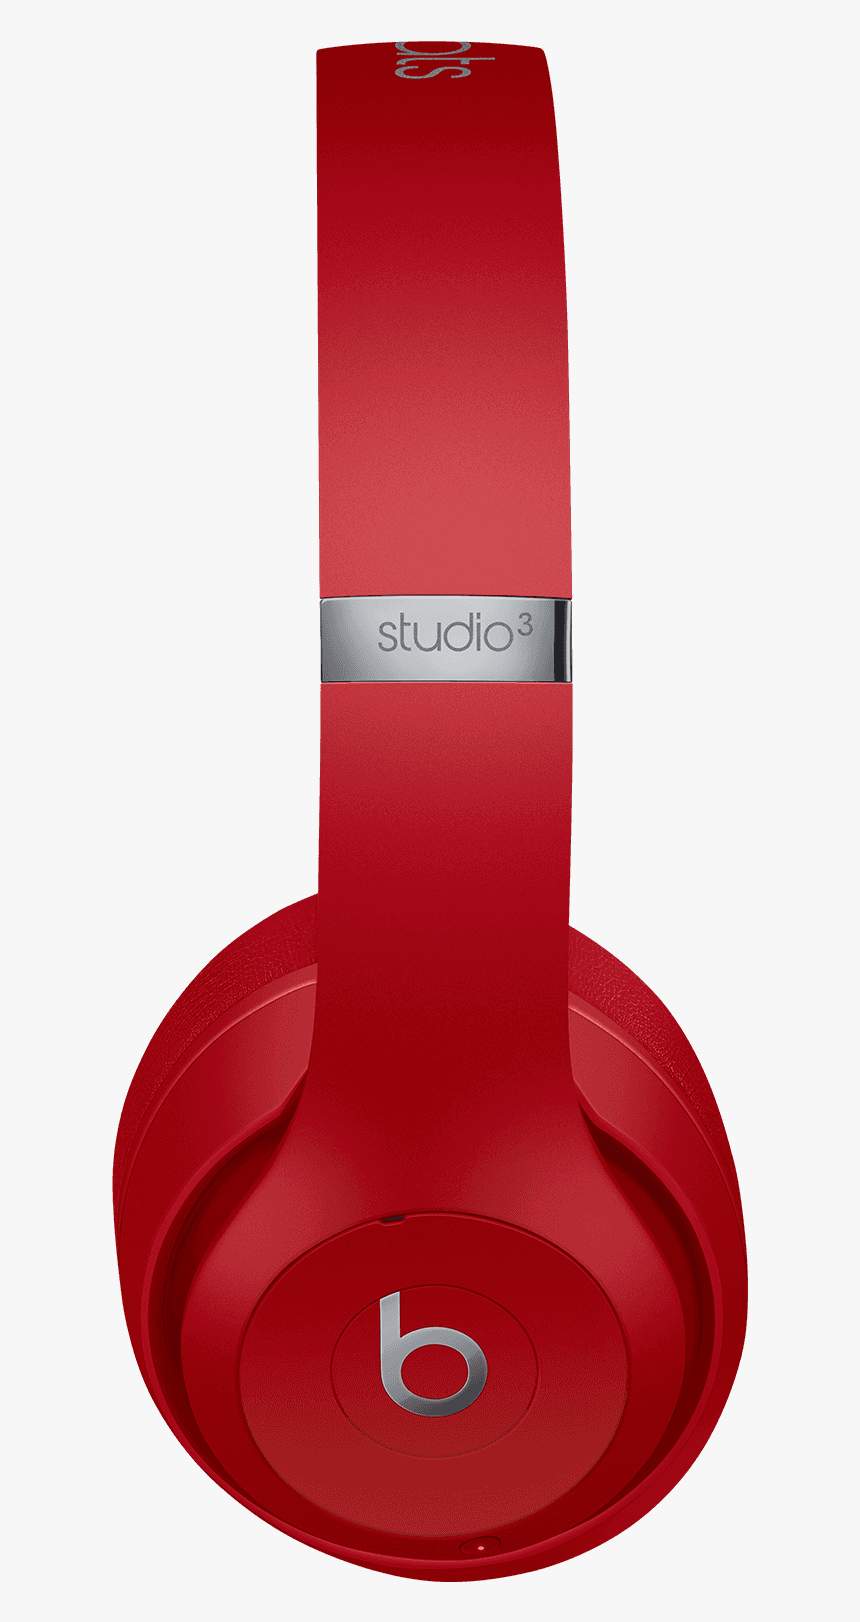 Load Image Into Gallery Viewer, Beats By Dre Studio3 - Headphones, HD Png Download, Free Download